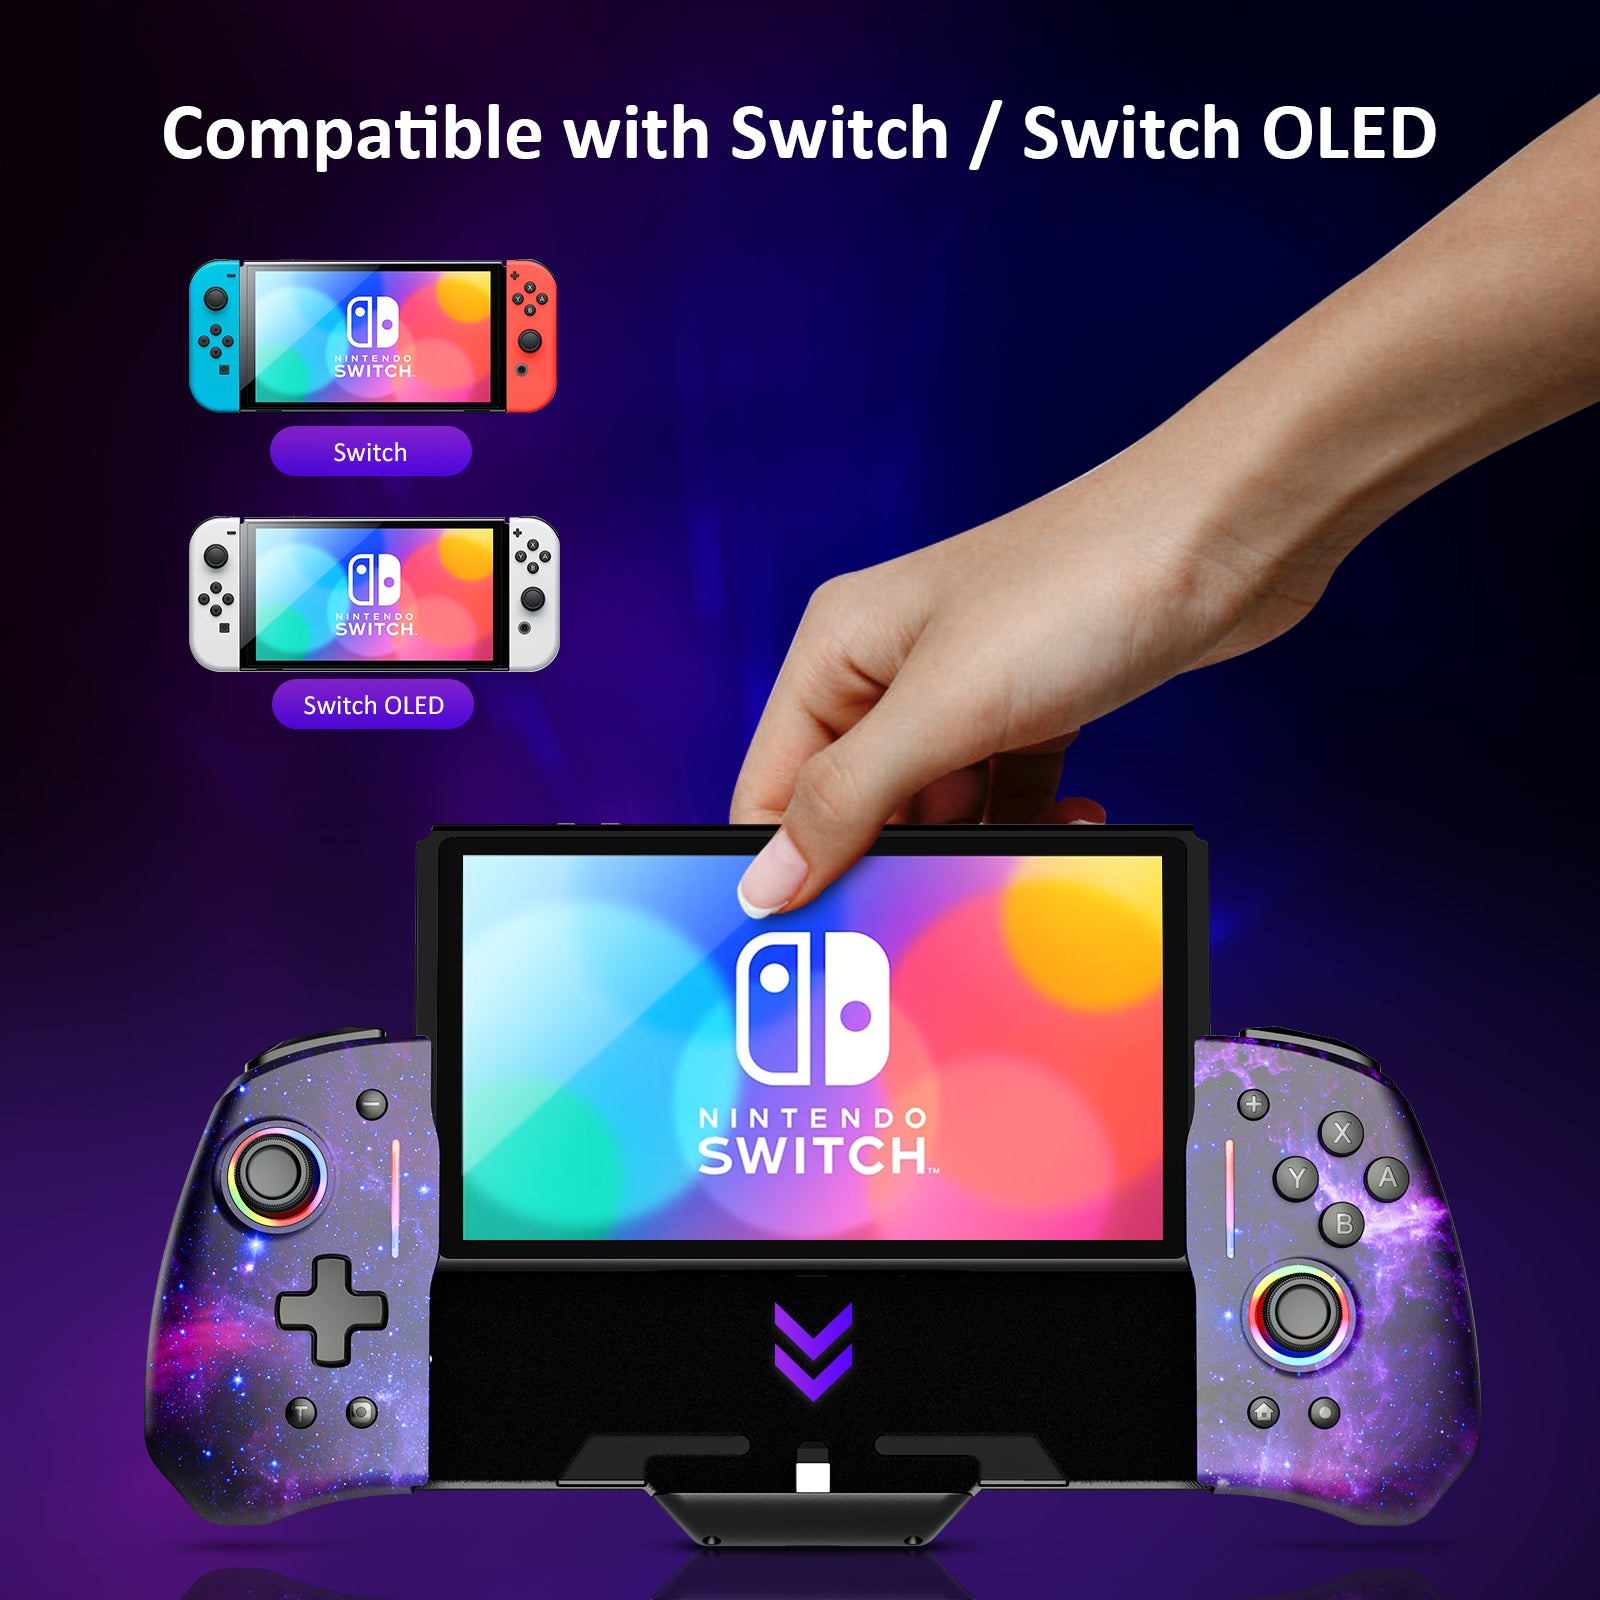 Gripcon controller is compatible with both Switch and Switch OLED versions.